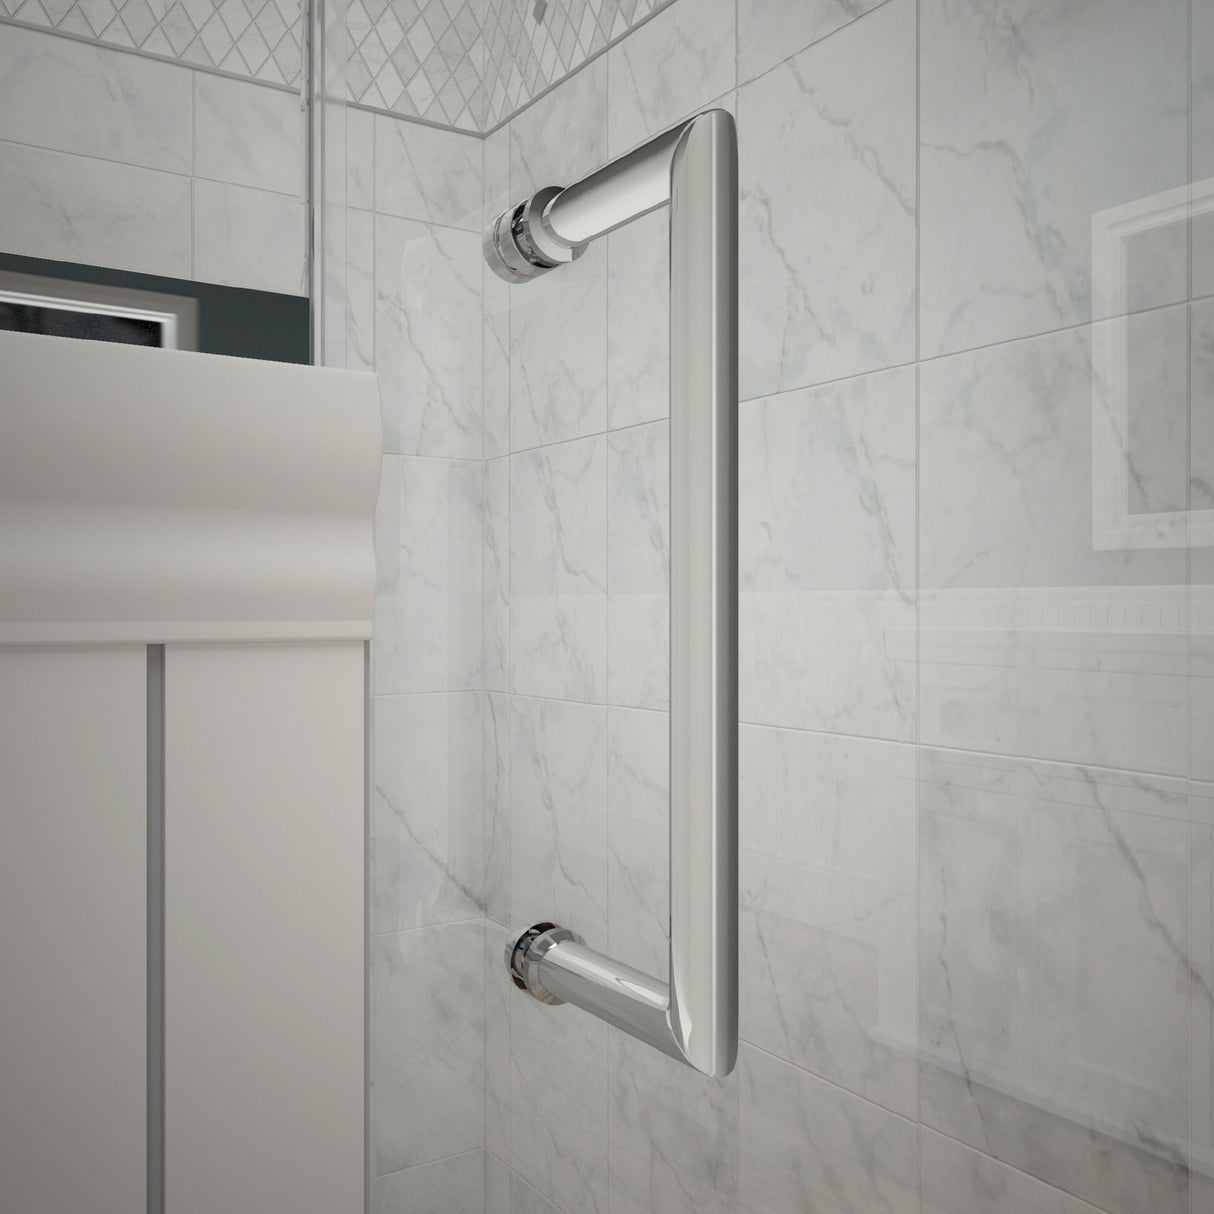 DreamLine Unidoor 50-51 in. W x 72 in. H Frameless Hinged Shower Door with Support Arm in Chrome